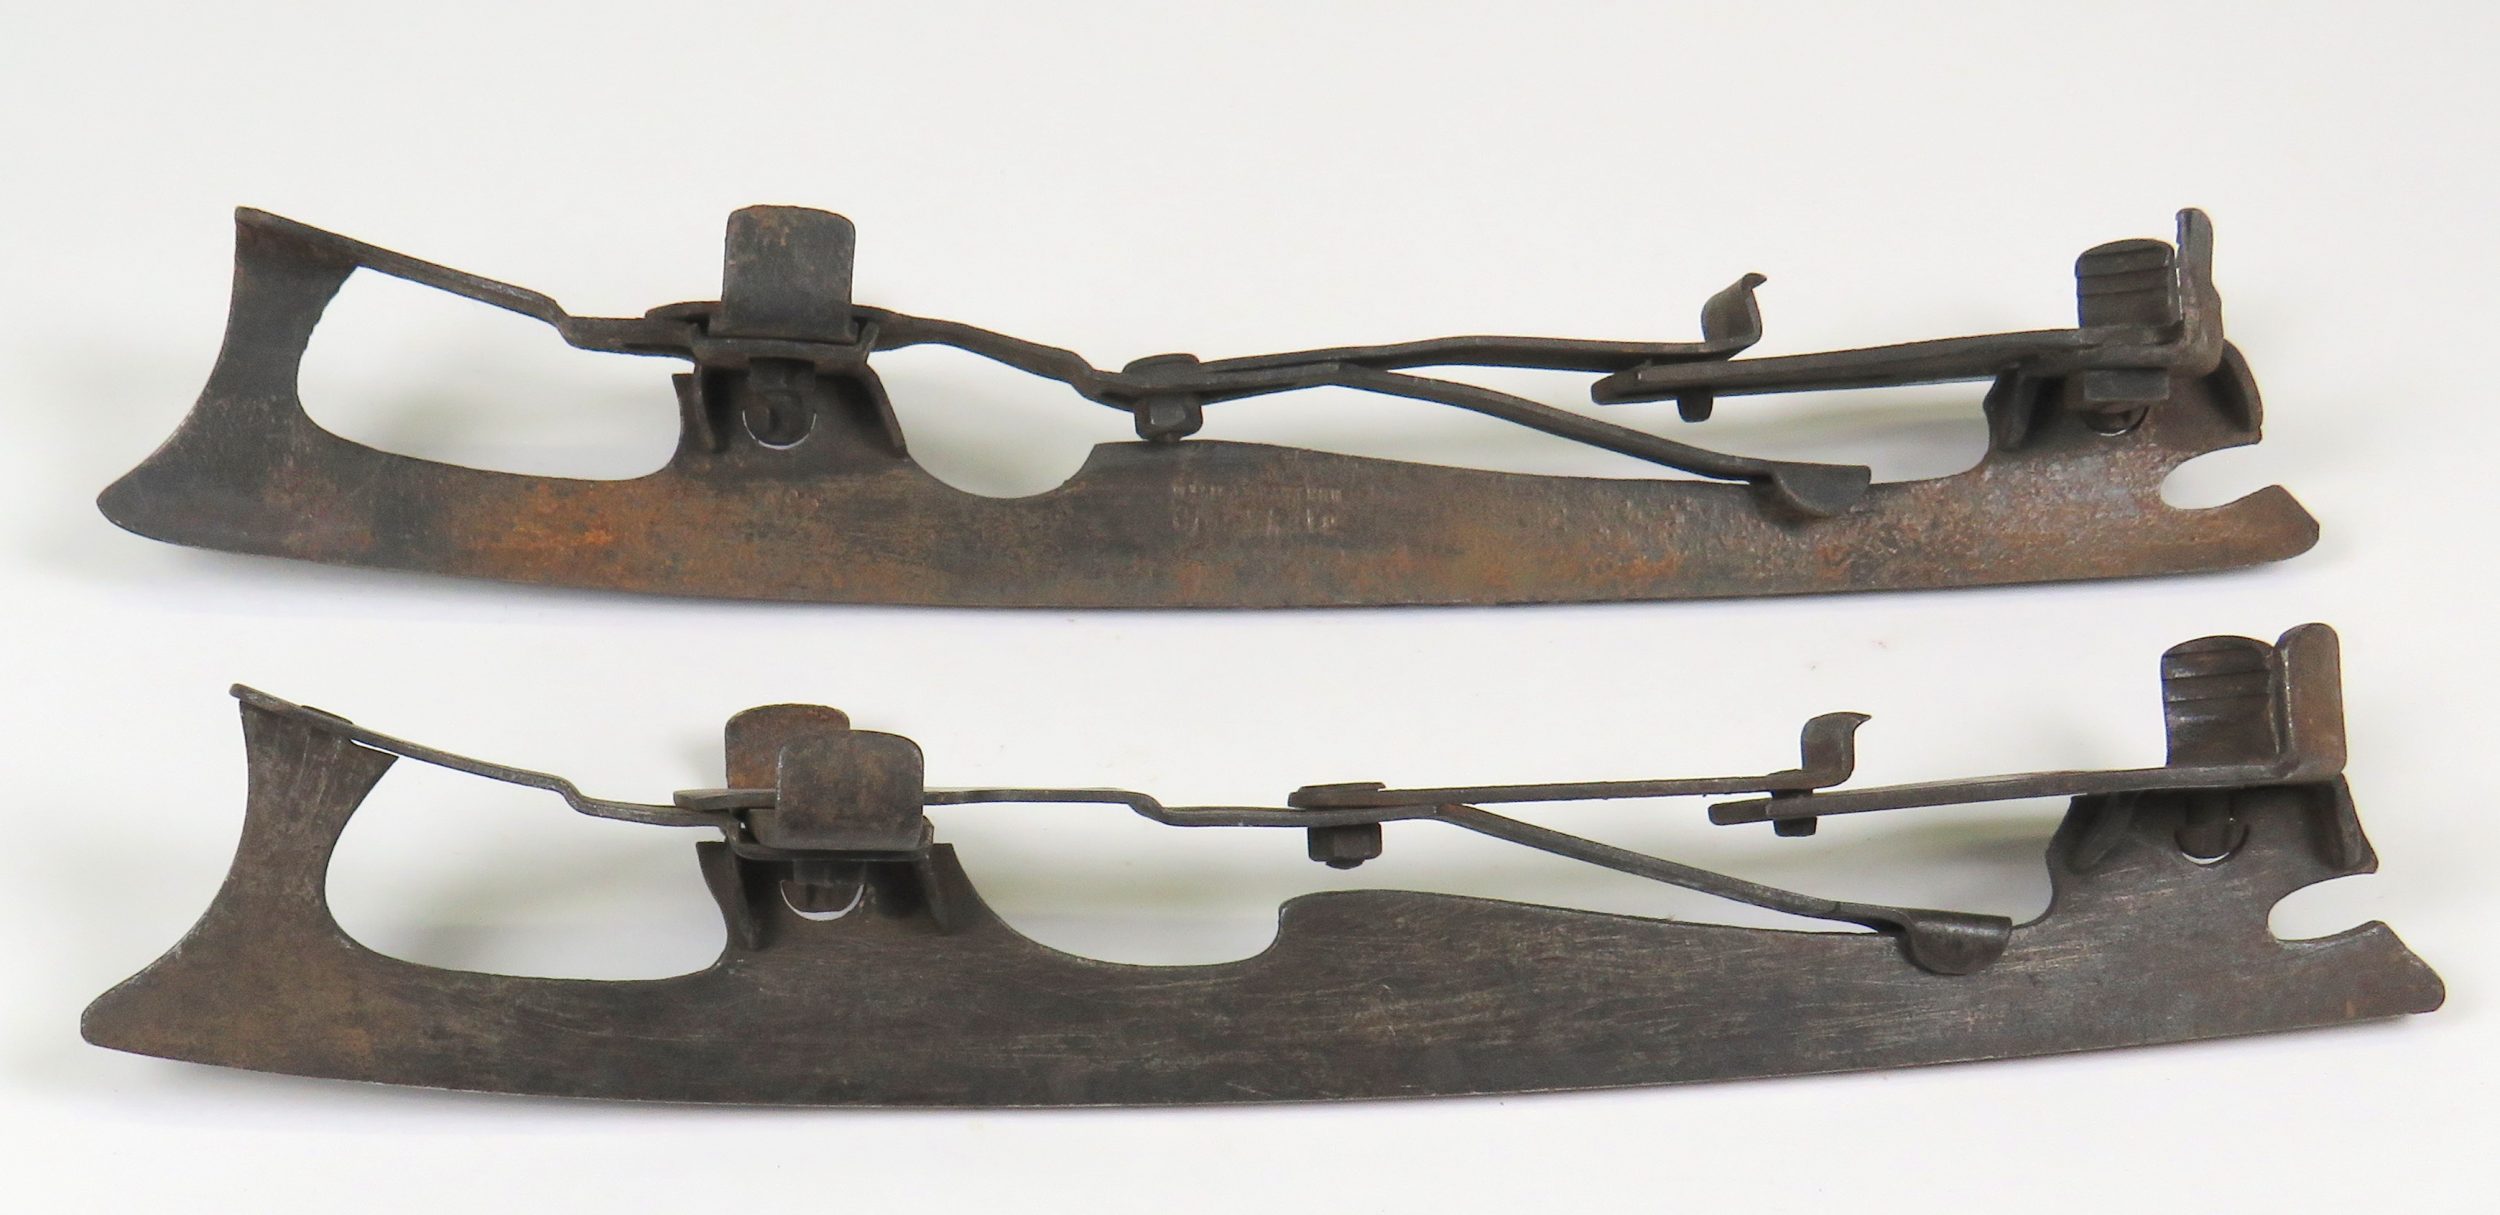 A pair of all-metal skate blades in profile view. Locking mechanism shown.